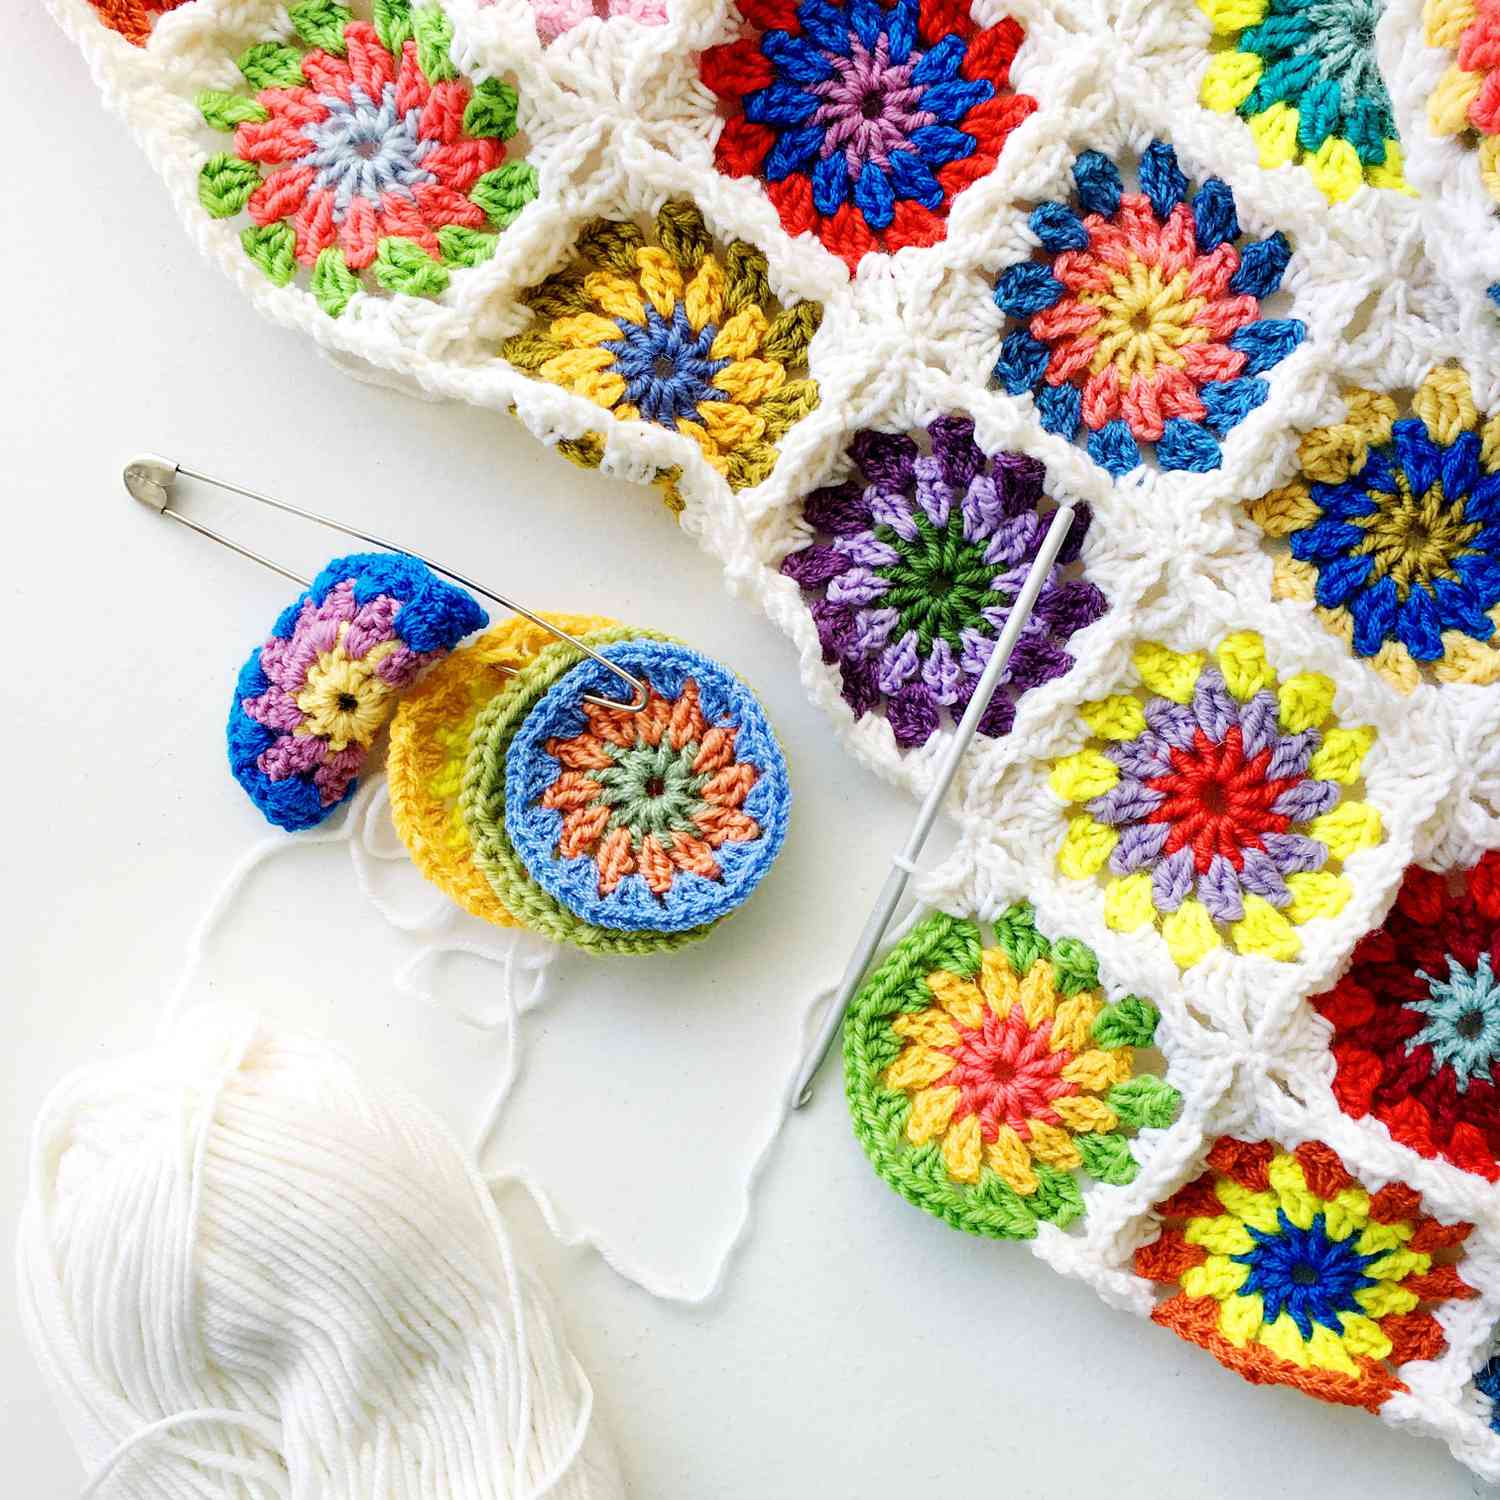 Crochet Square Patterns For Blankets